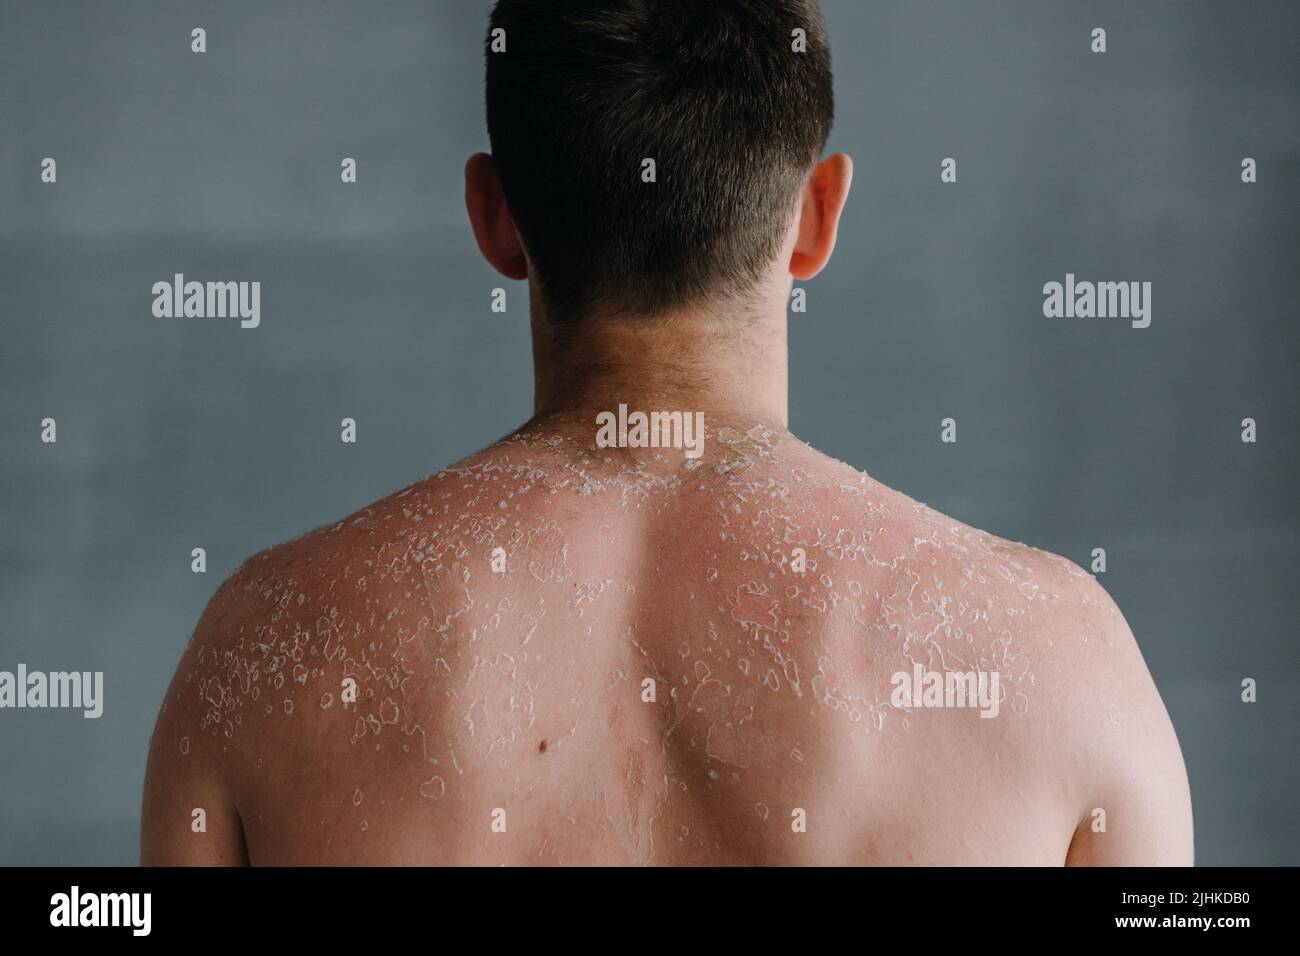 Dermatological conditions of peeling skin on man's back and shoulders, peeling skin and skin care concept Stock Photo